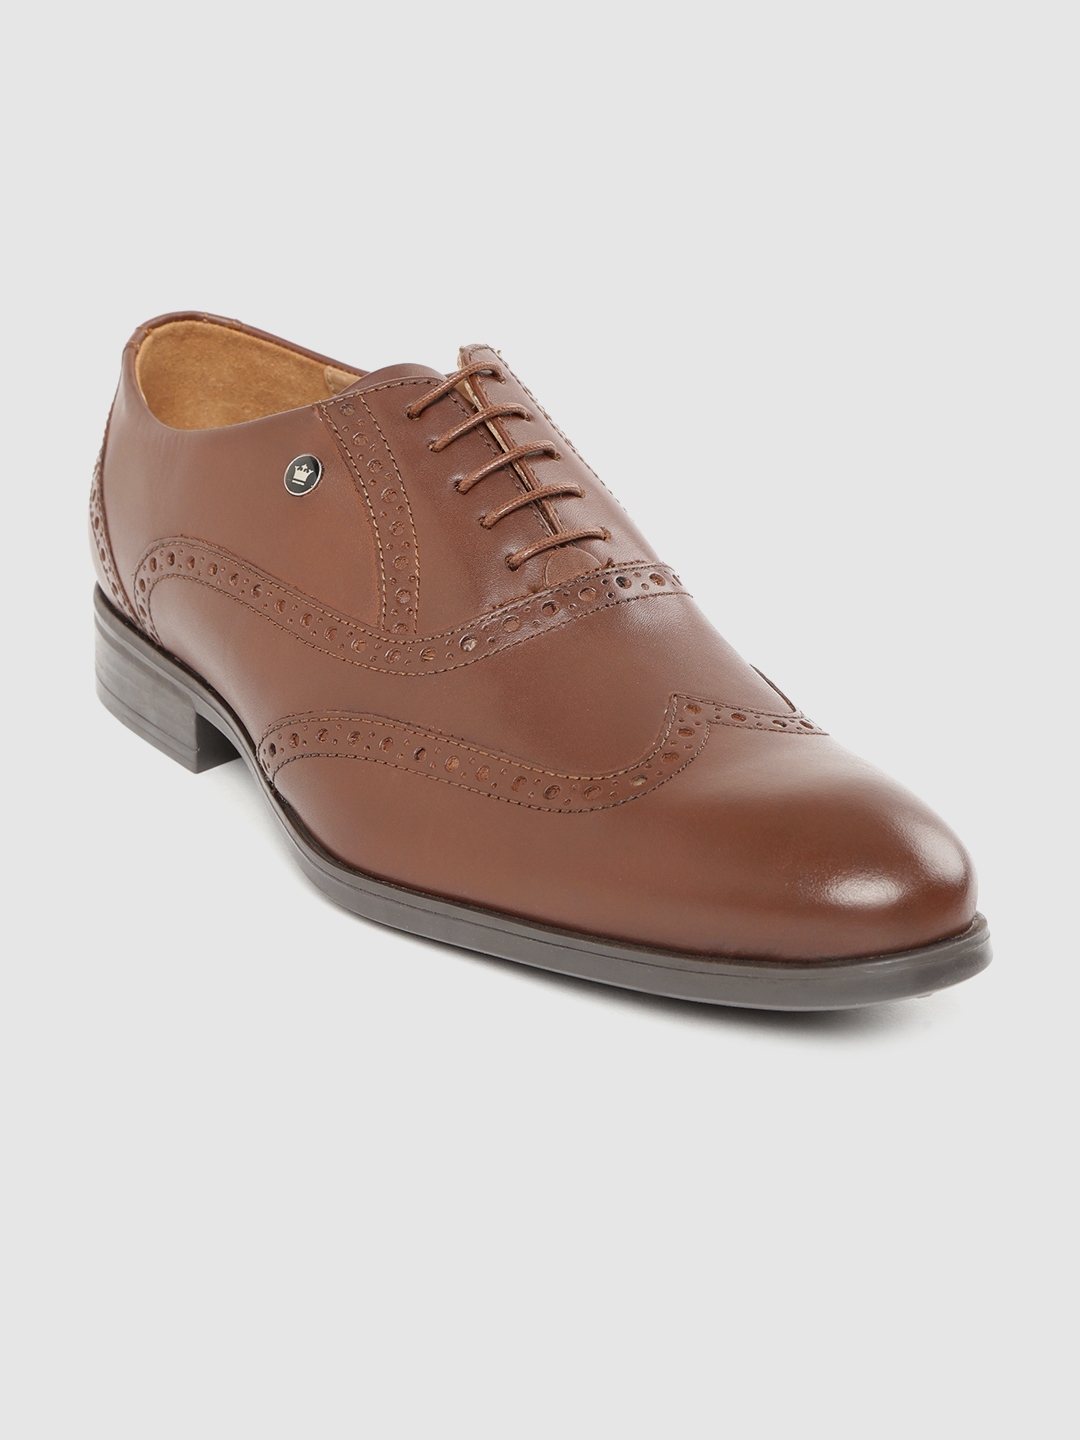 Buy Louis Philippe Men Brown Leather Formal Brogues - Formal Shoes for Men 10628190 | Myntra